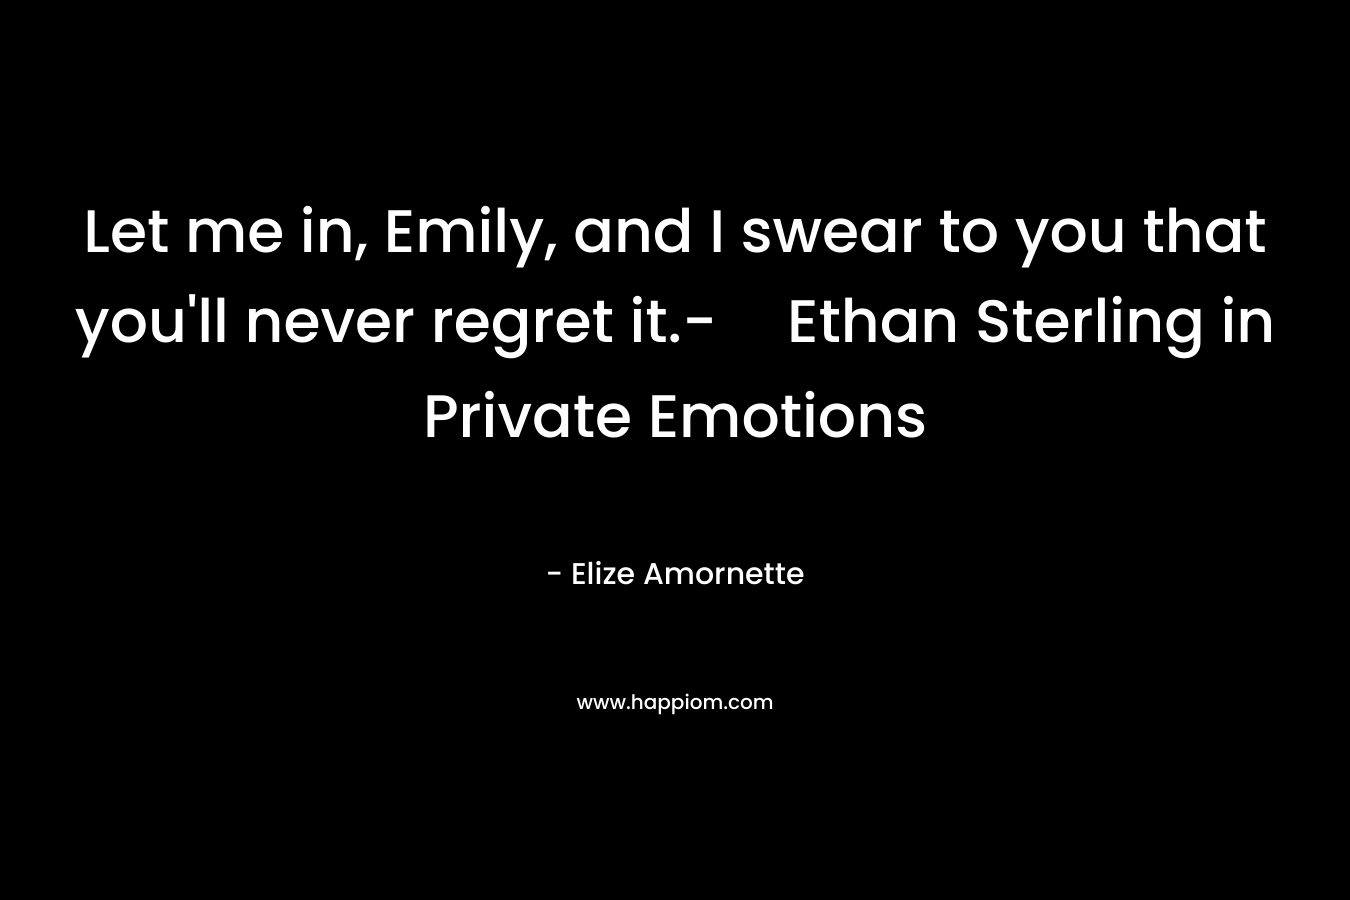 Let me in, Emily, and I swear to you that you’ll never regret it.-Ethan Sterling in Private Emotions – Elize Amornette